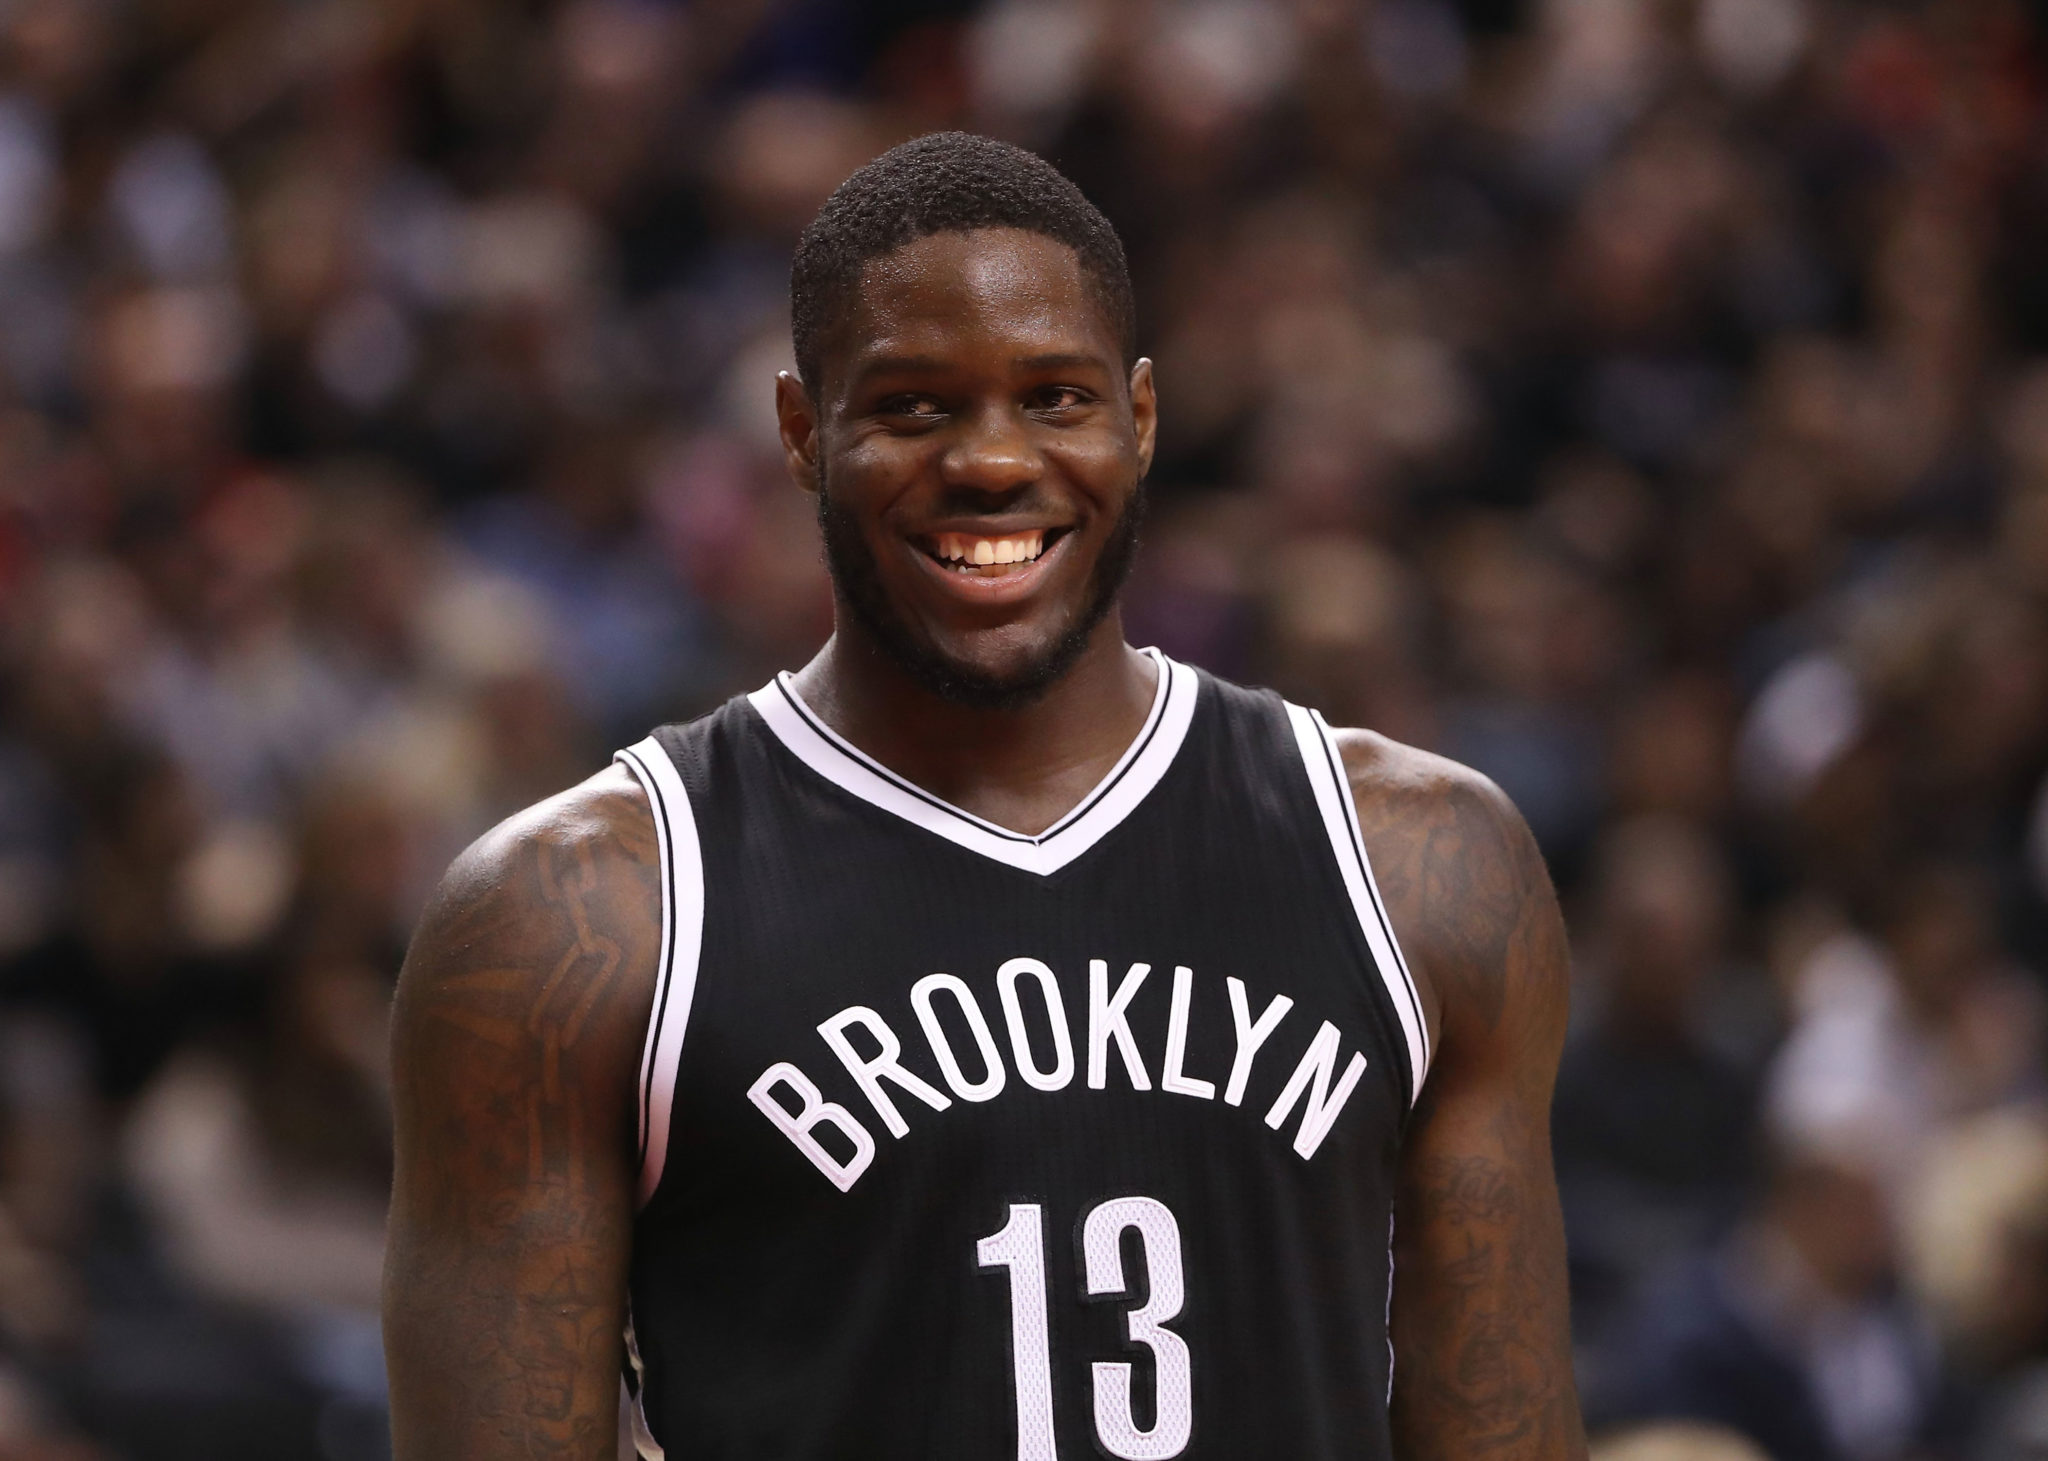 Rockets Sign Former No. 1 Overall Pick Anthony Bennett to Non-Guaranteed Deal